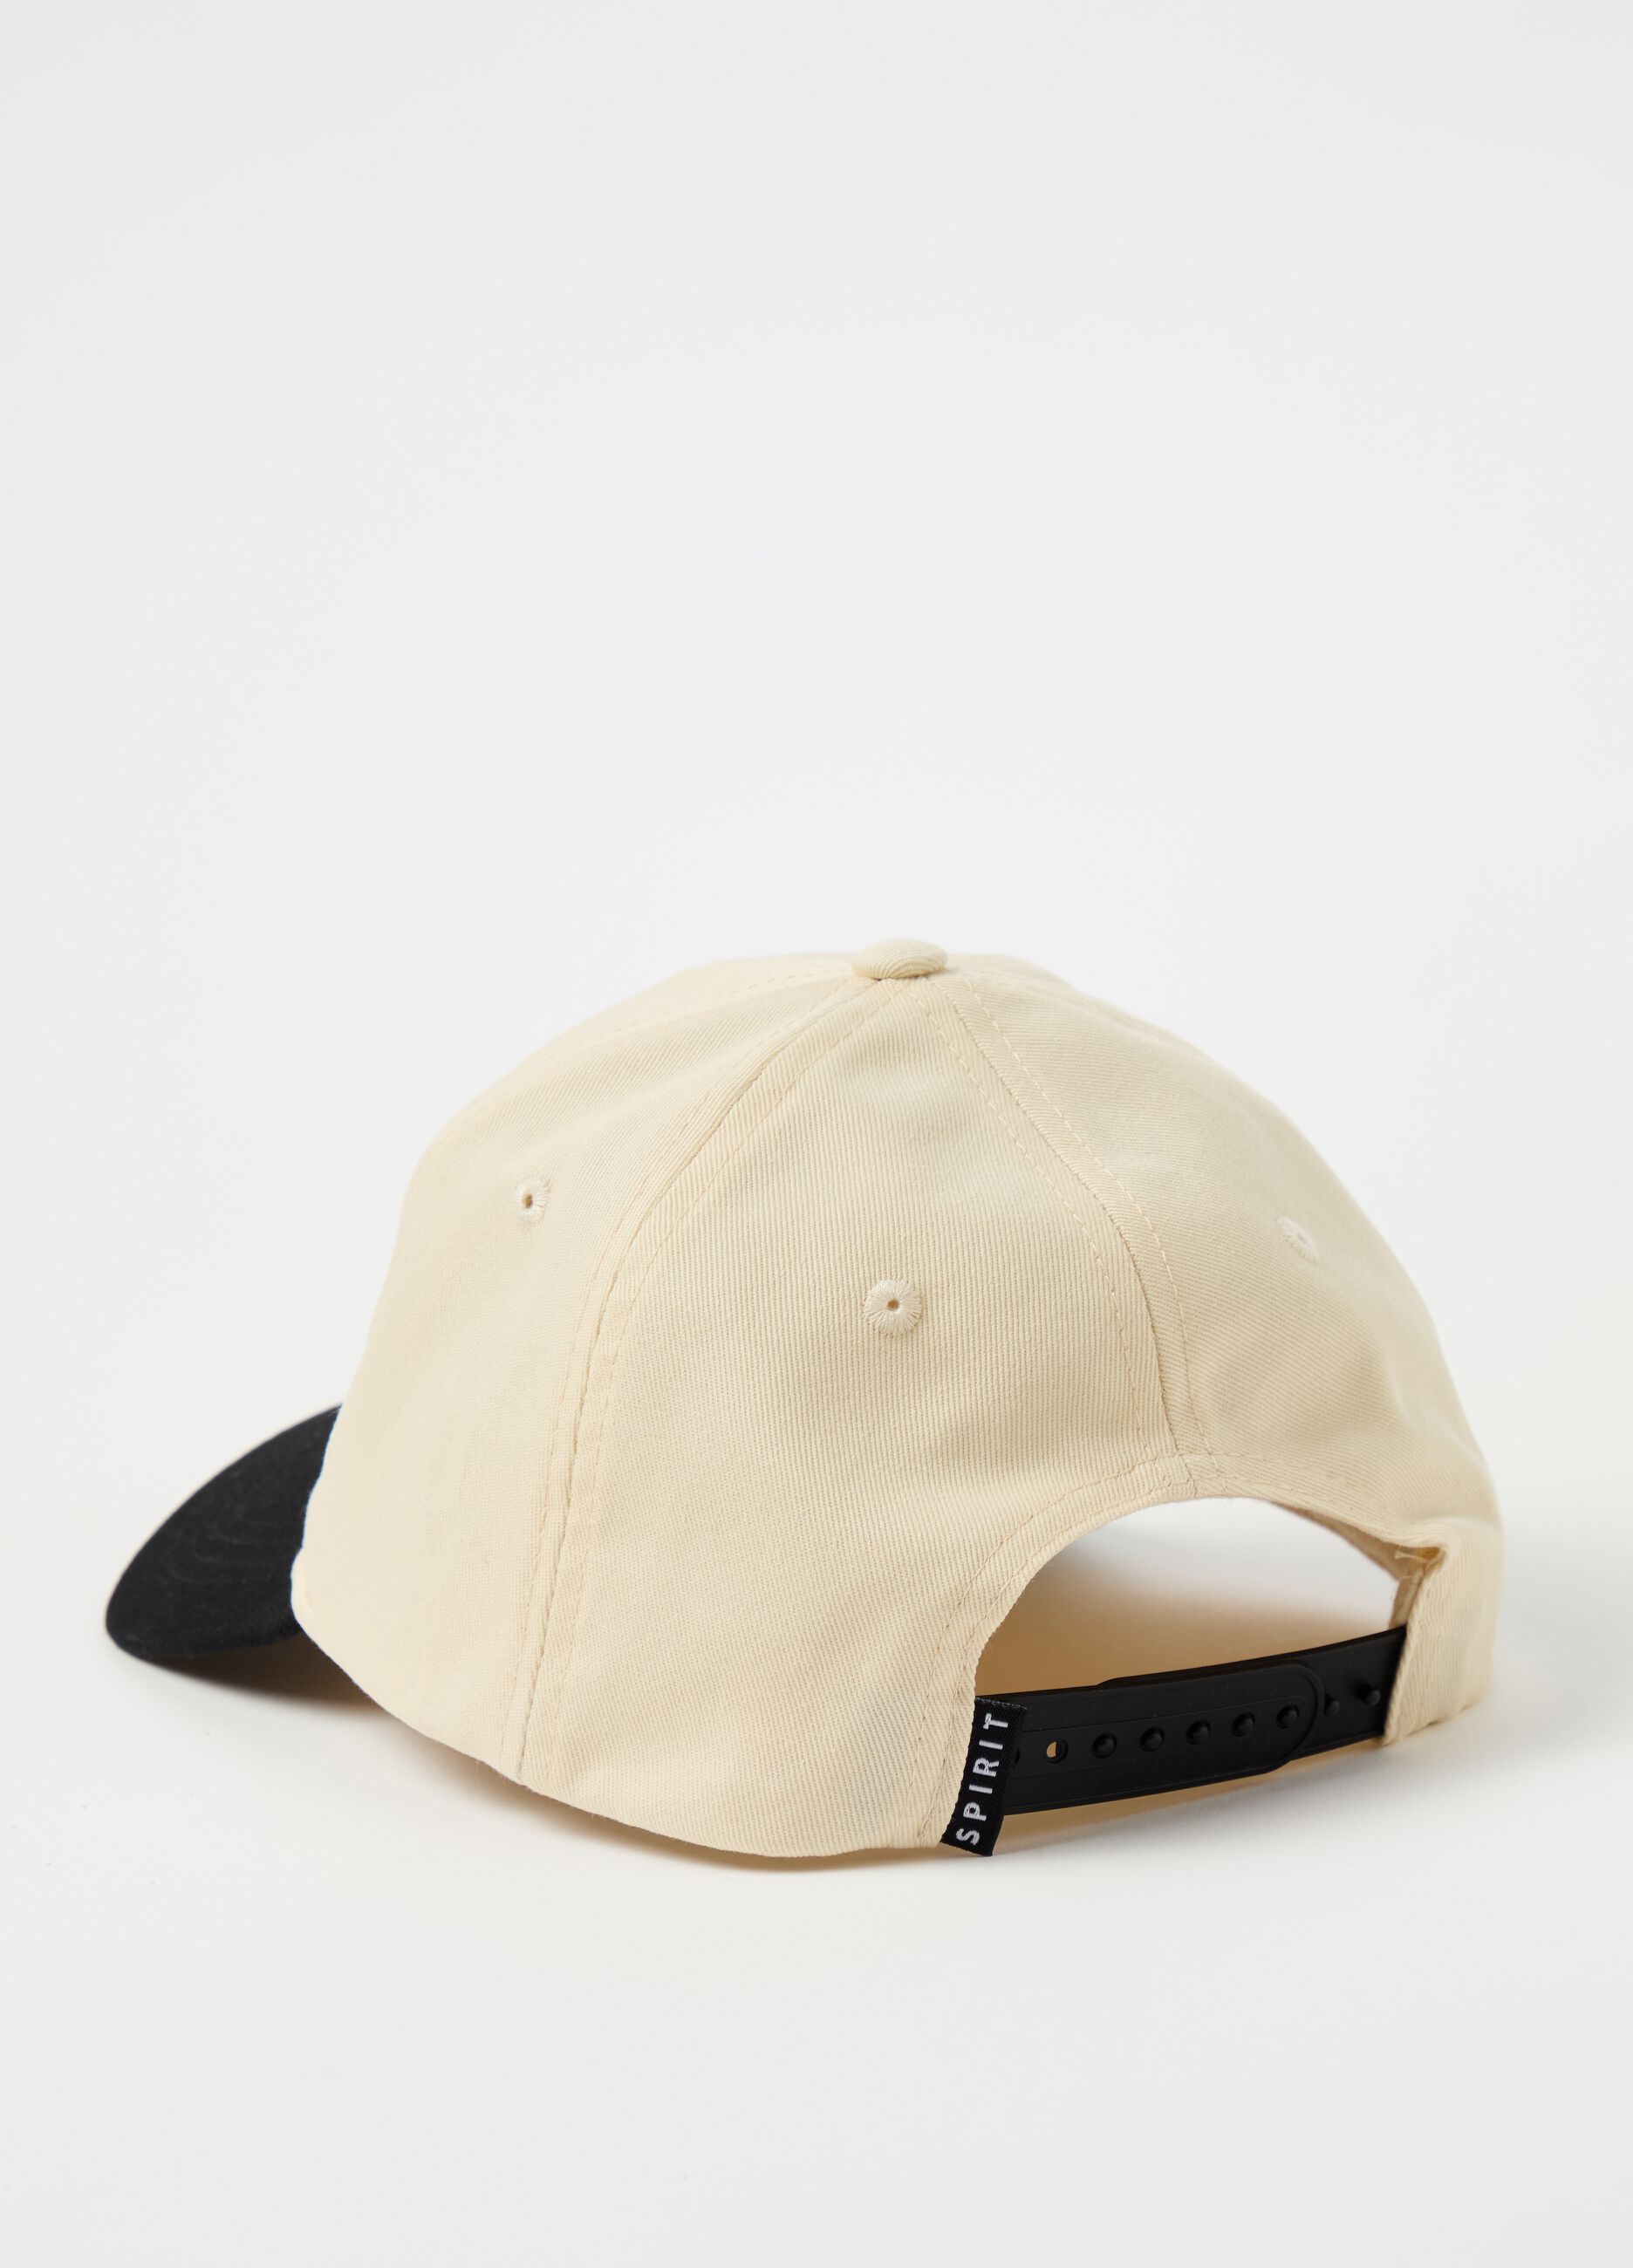 Baseball cap with Jeep patch